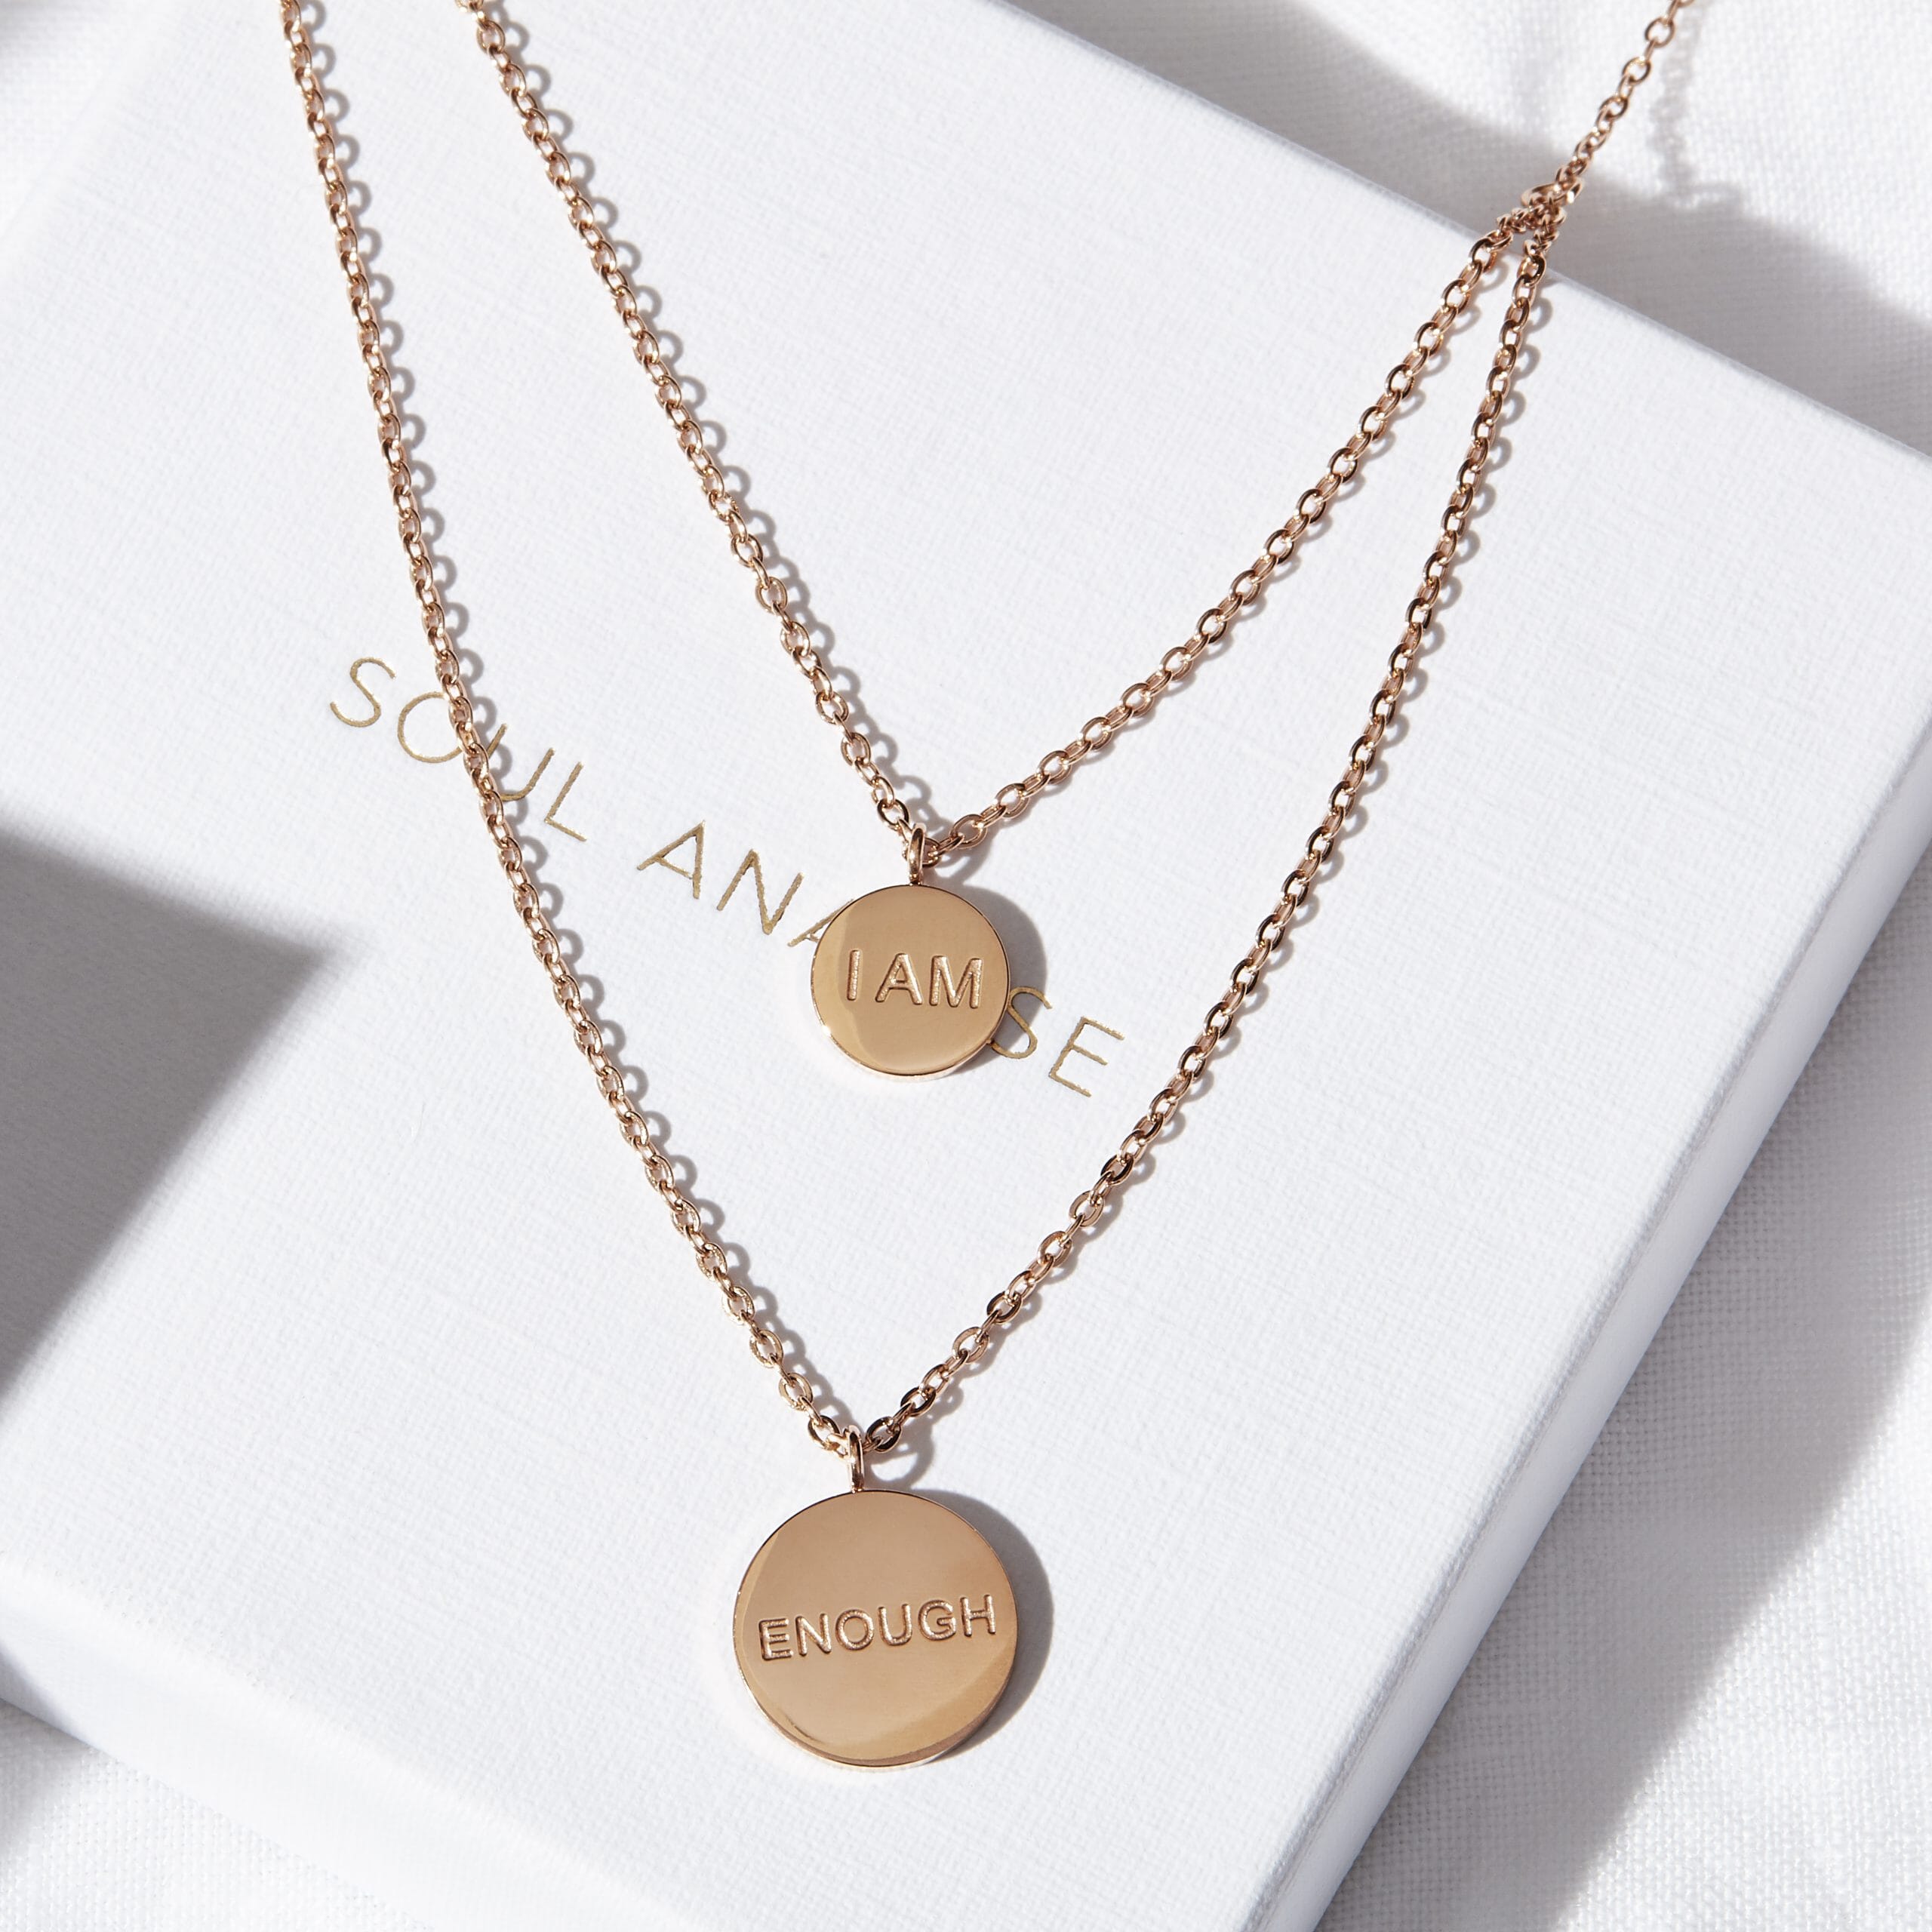 I AM ENOUGH Inspirational Hand Stamped Engraved Glamour Pendant Necklace  for Women Gift Jewelry,10Pcs/Lot, #LN2266 - AliExpress